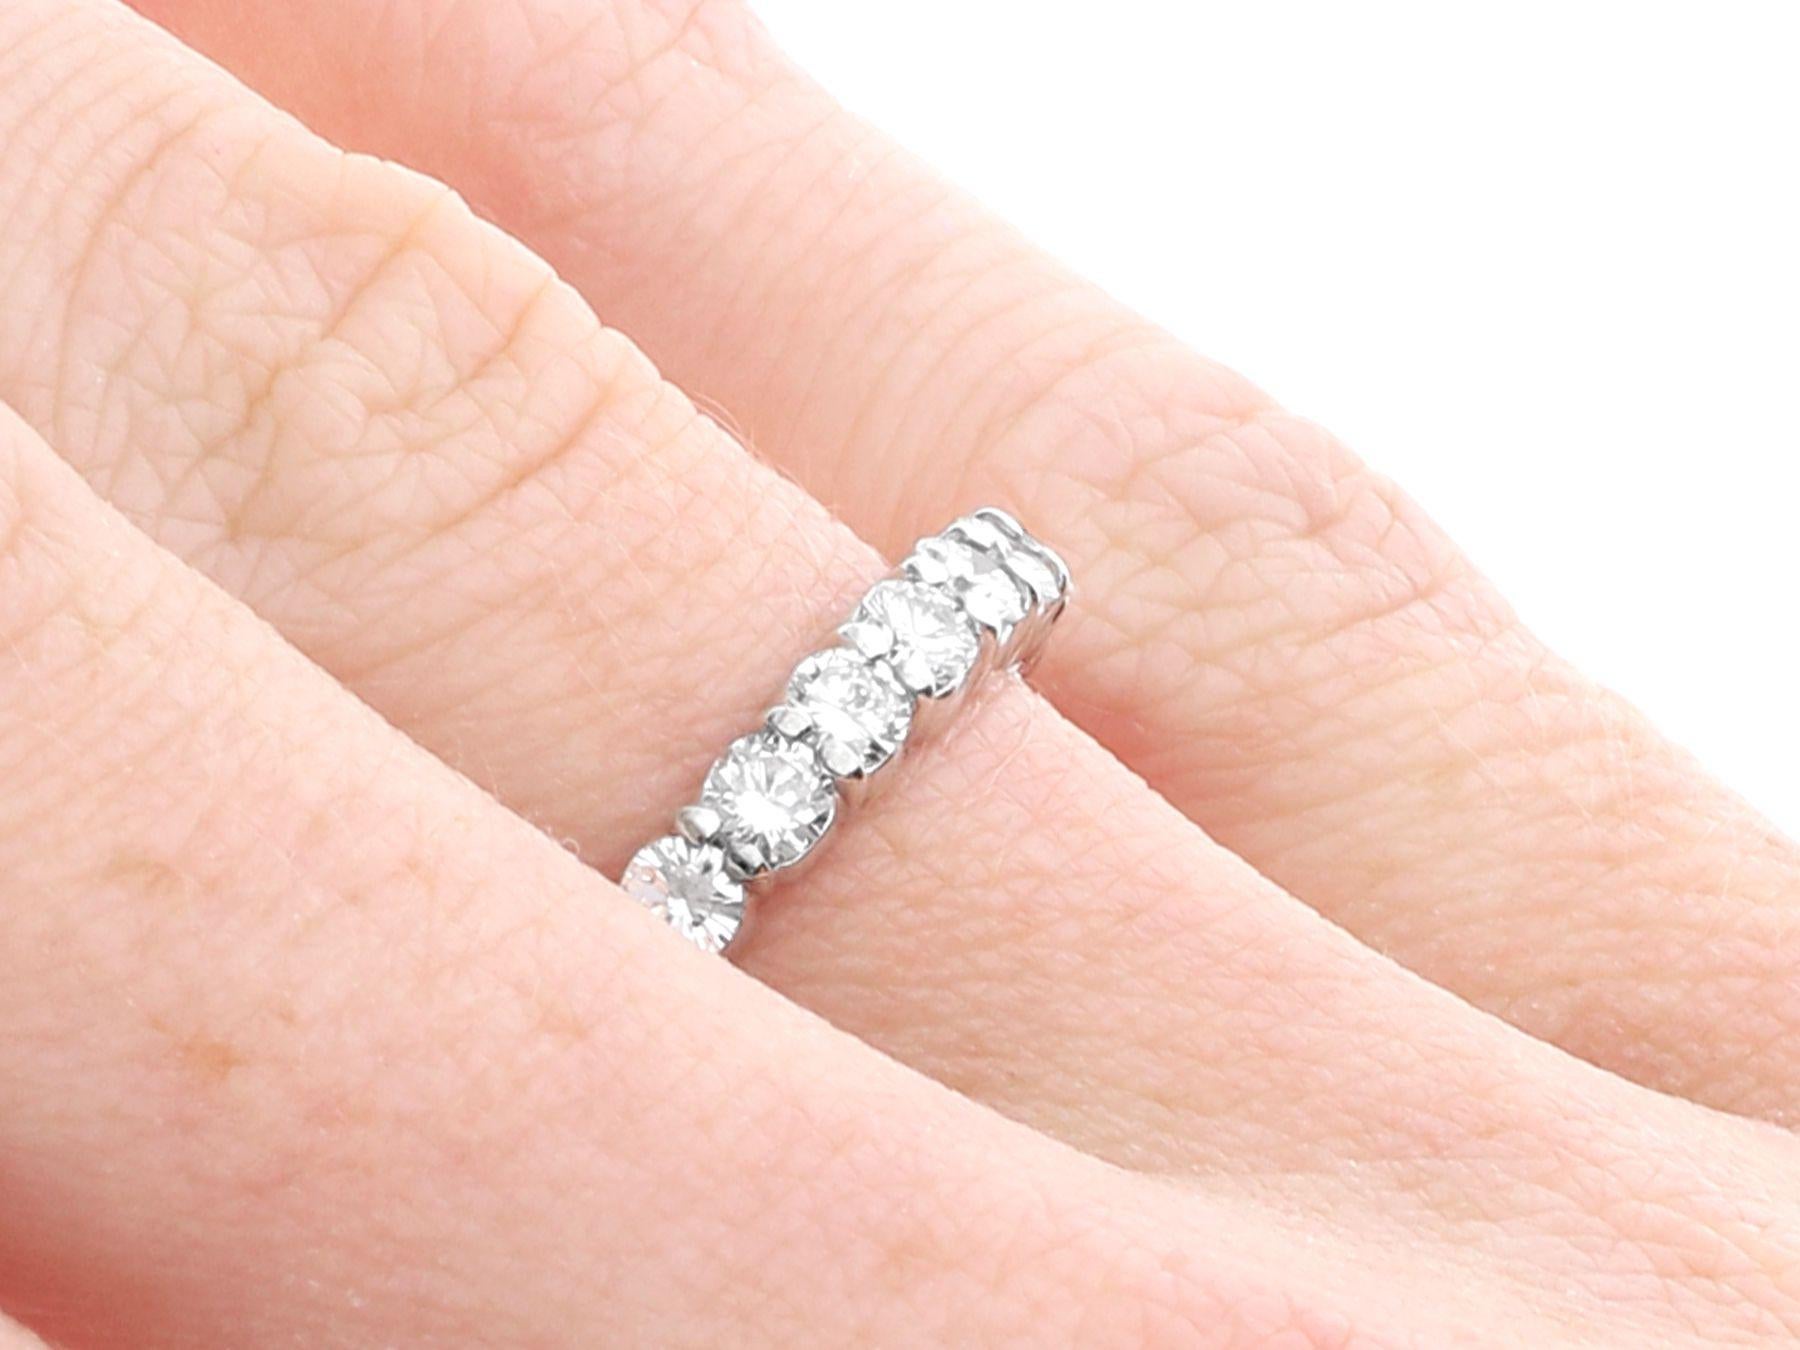 Vintage French 1.76 Carat Diamond and White Gold Full Eternity Ring For Sale 2